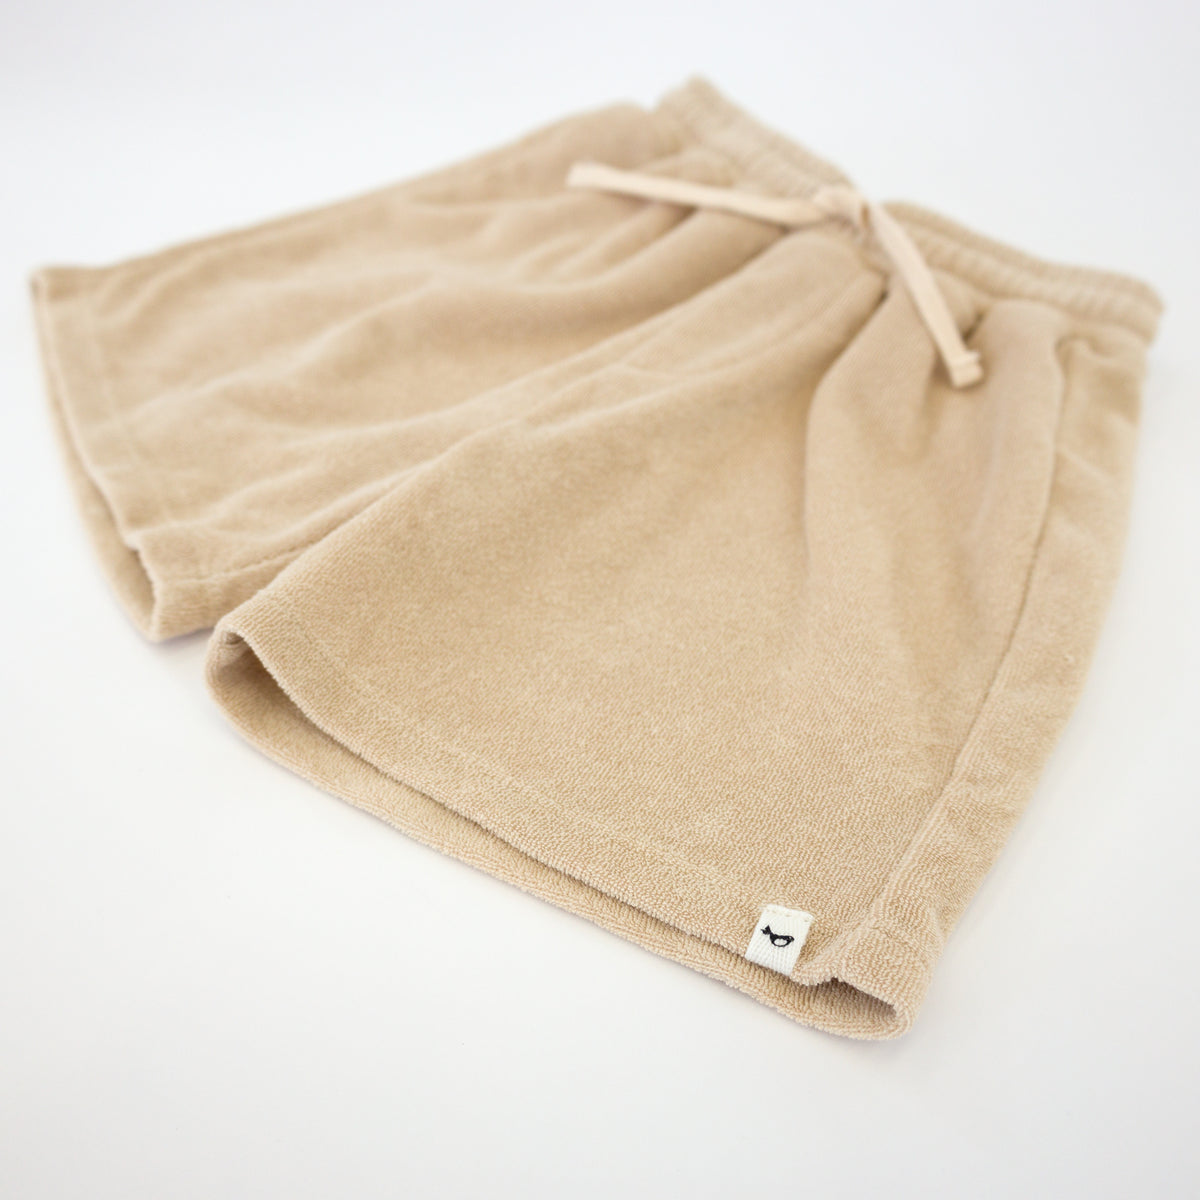 oh baby! Cotton Terry Boys Track Shorts - Sand